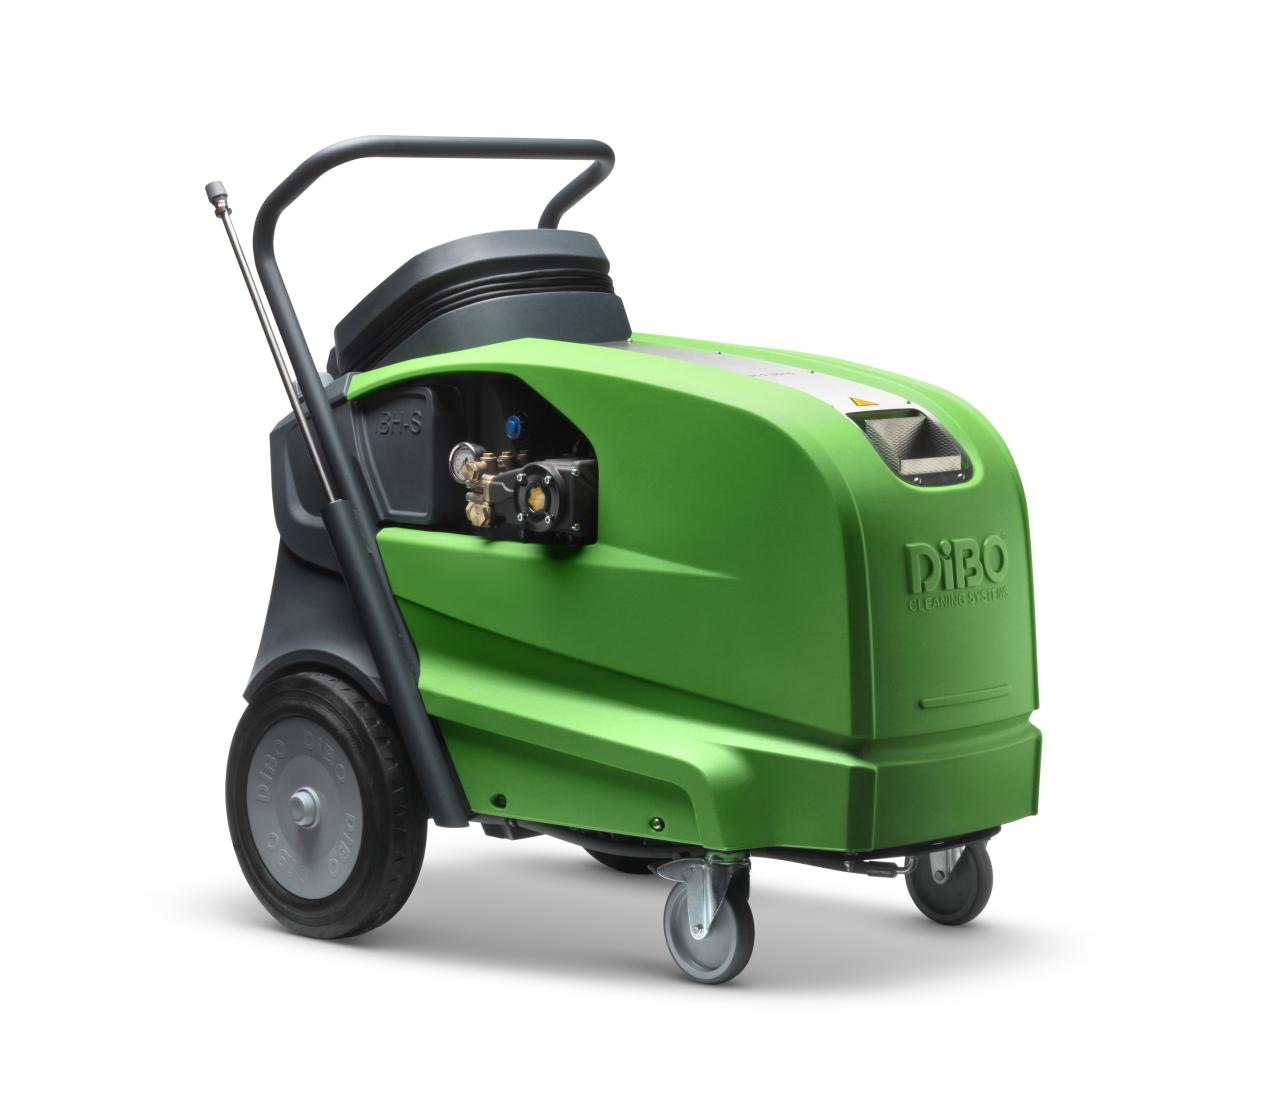 DiBO IBH-S hot water high pressure cleaner with energy saving Dual Power Heating system